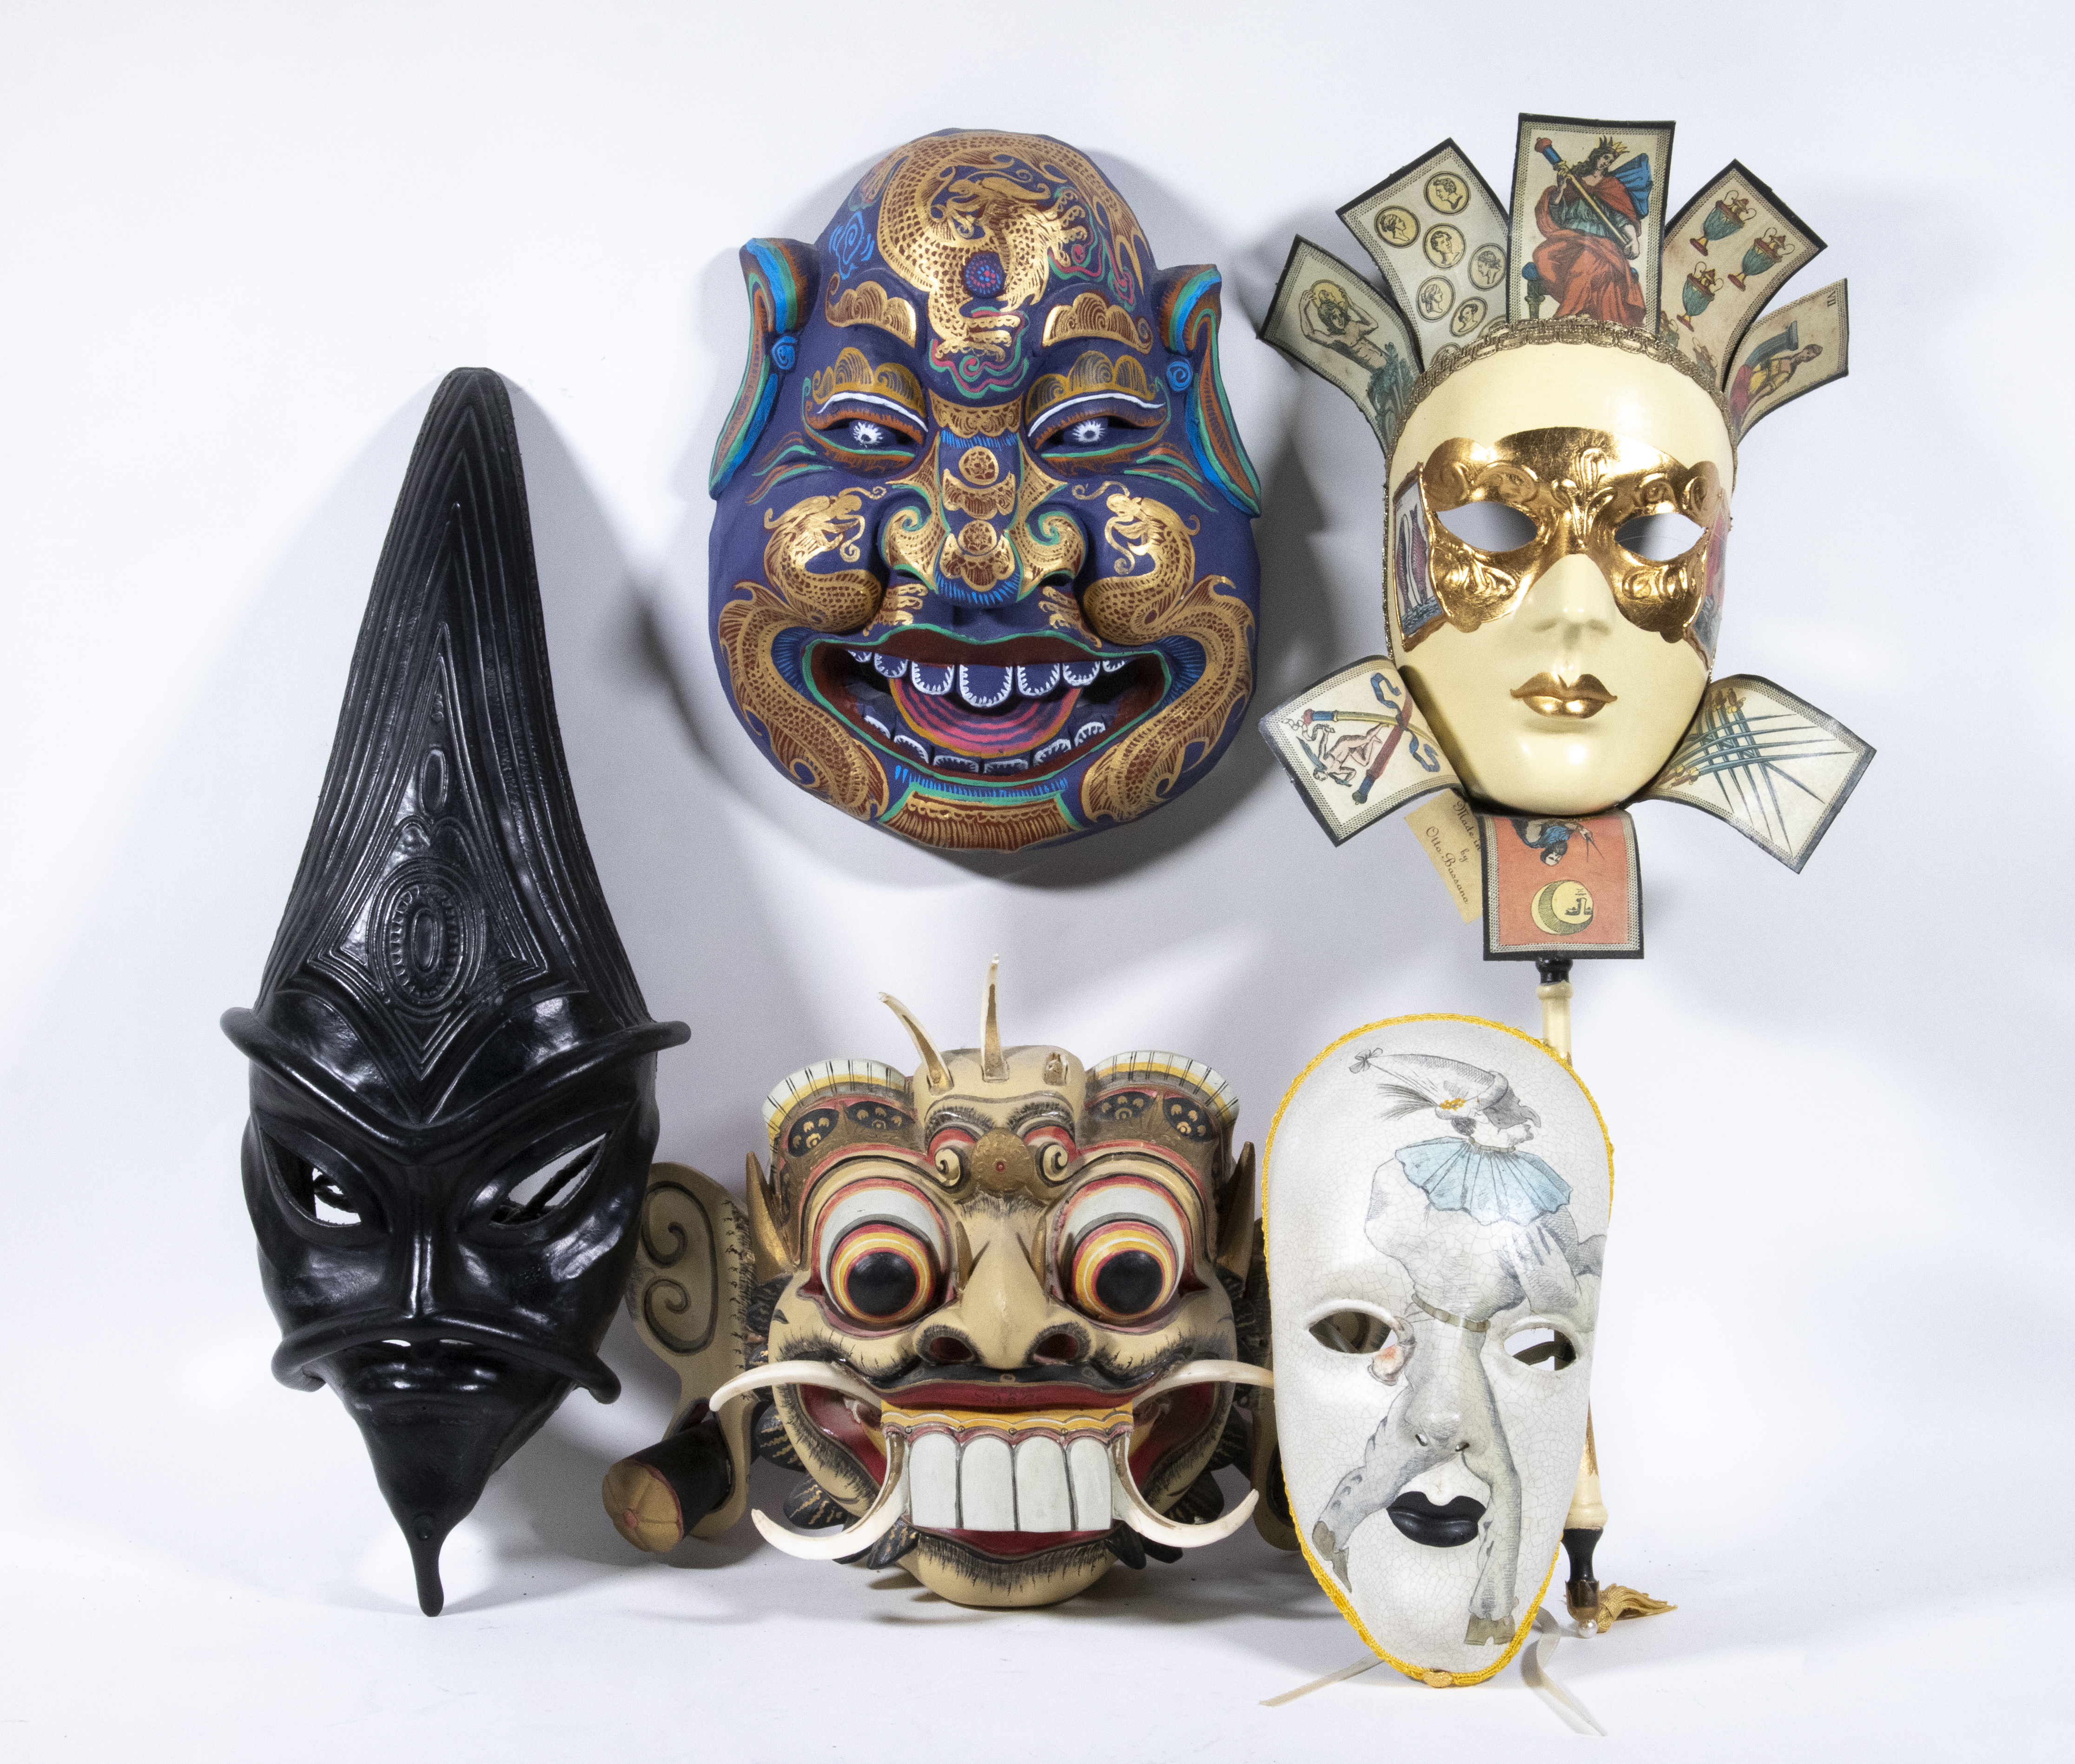  5 HANDMADE THEATRICAL MASKS FROM 2b230d